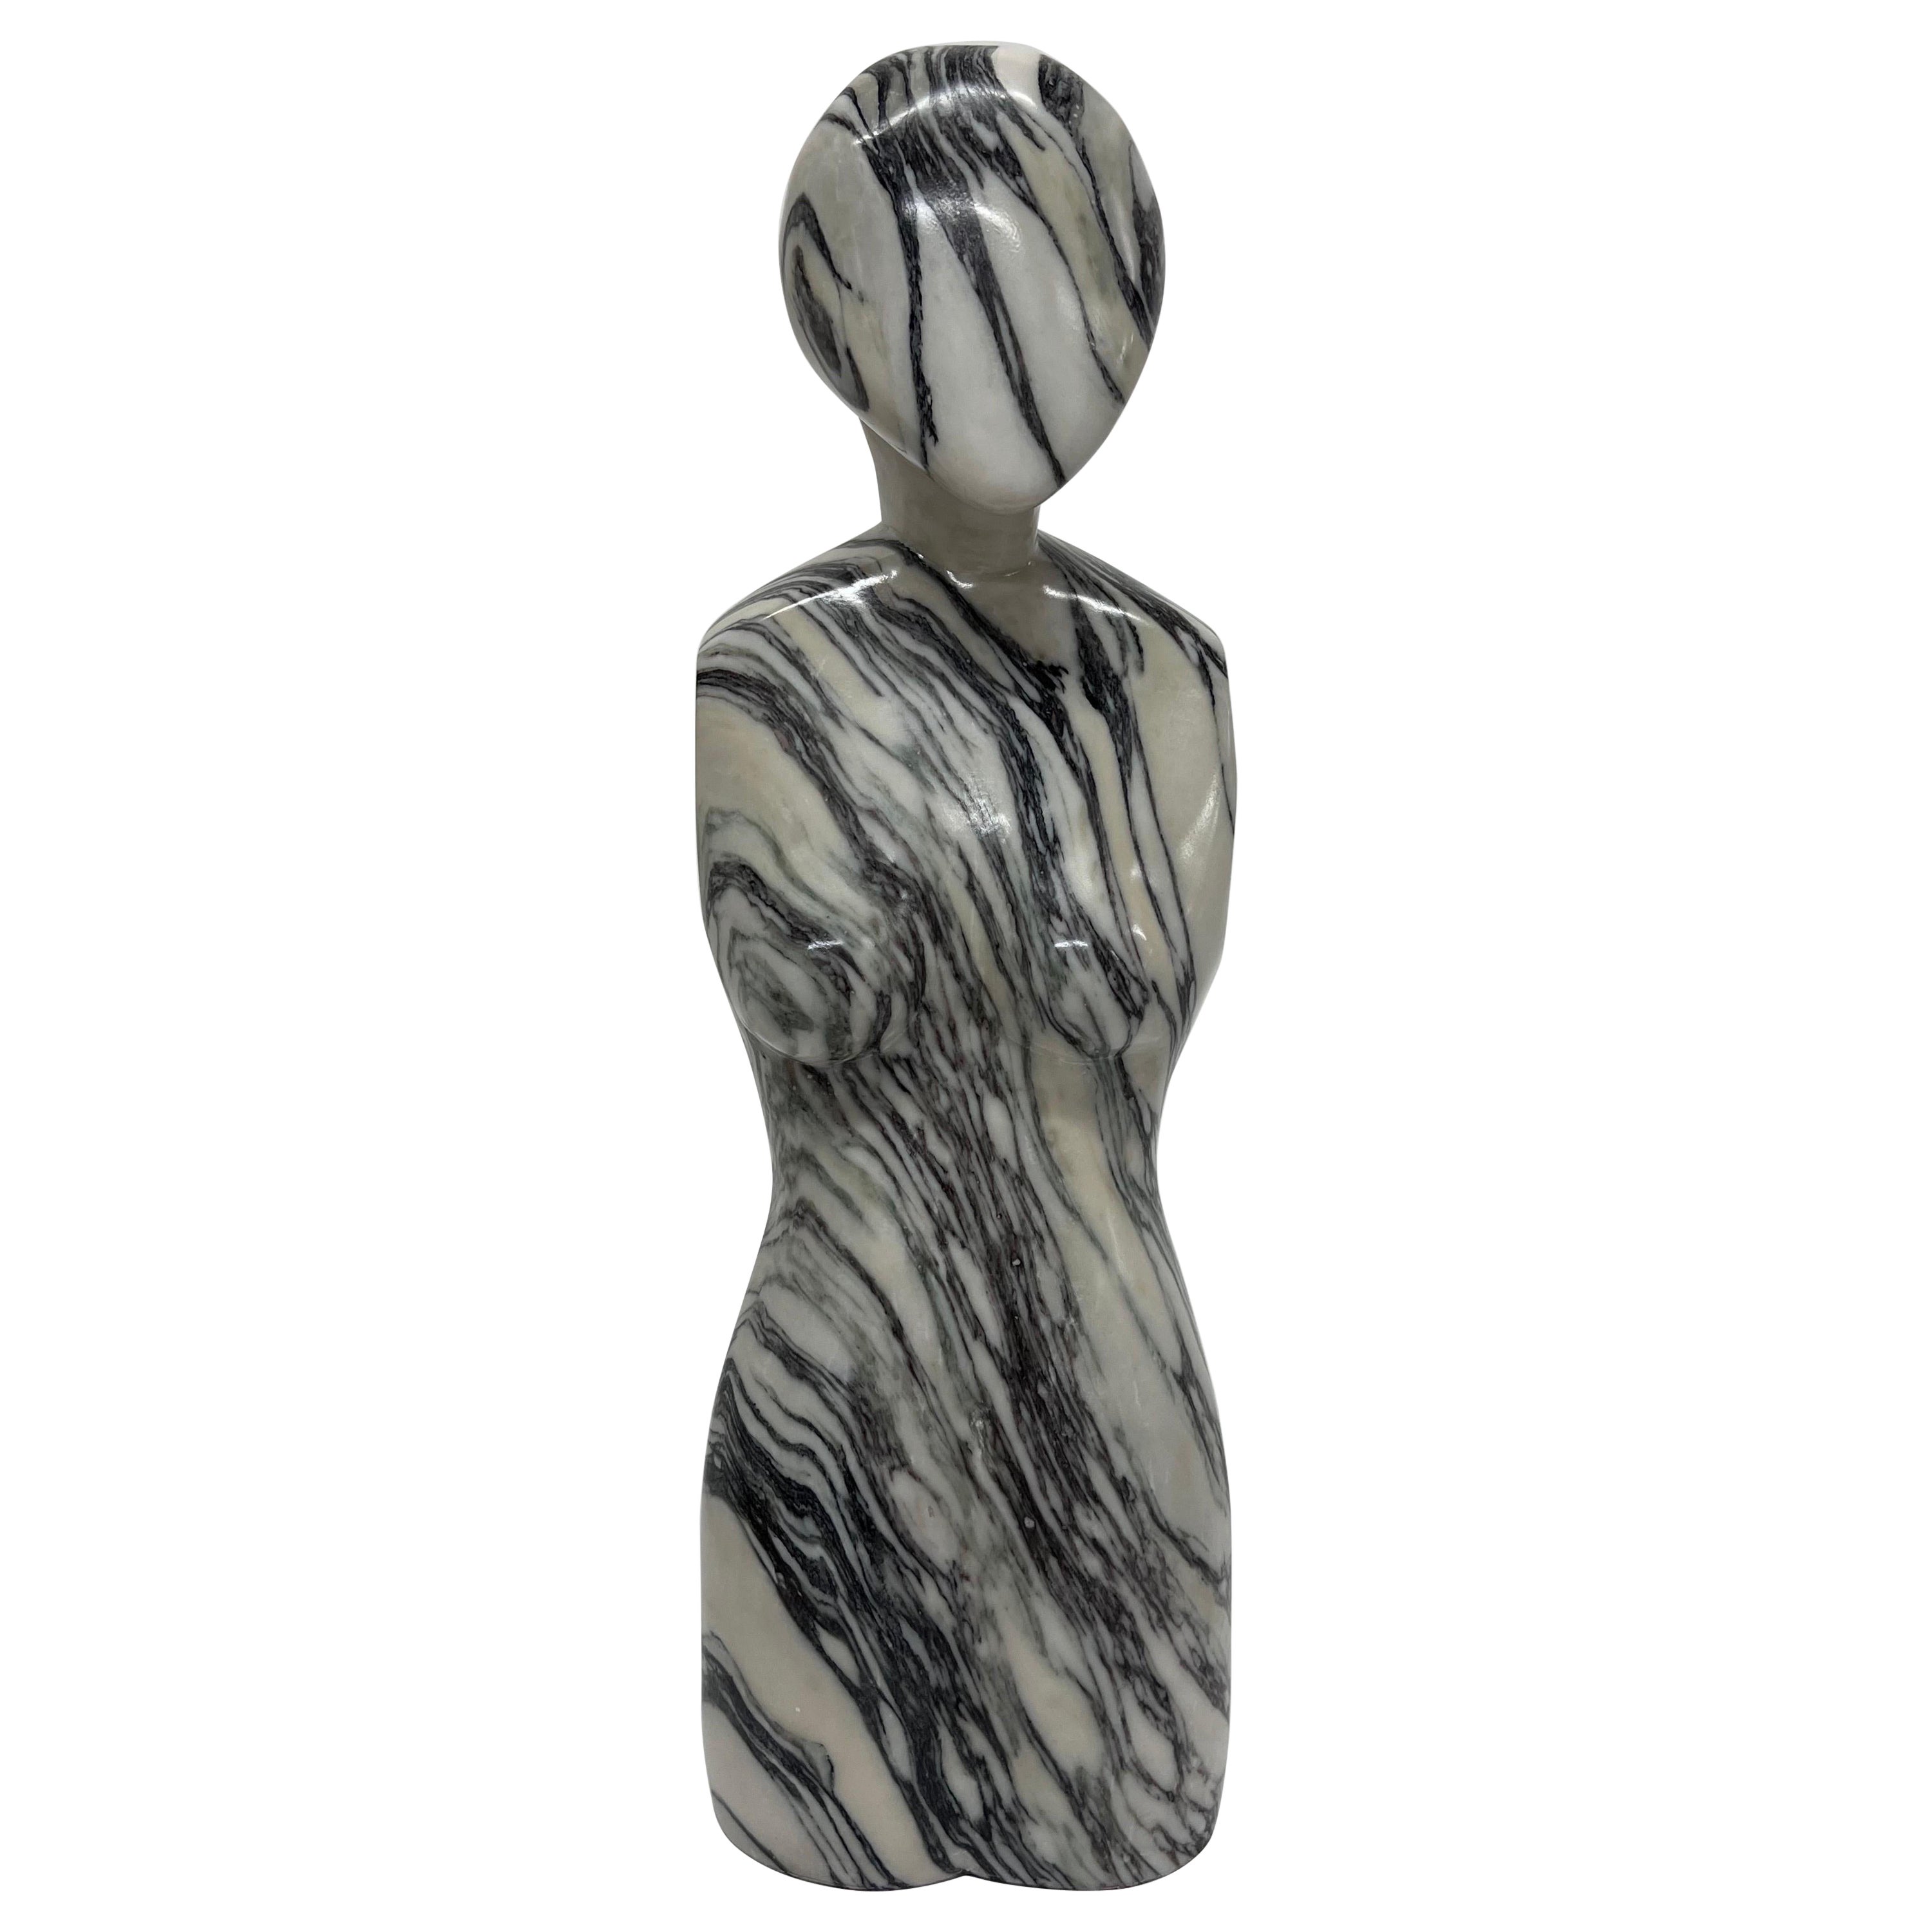 Postmodern Solid Polished Carved Italian Marble Female Figurative Sculpture